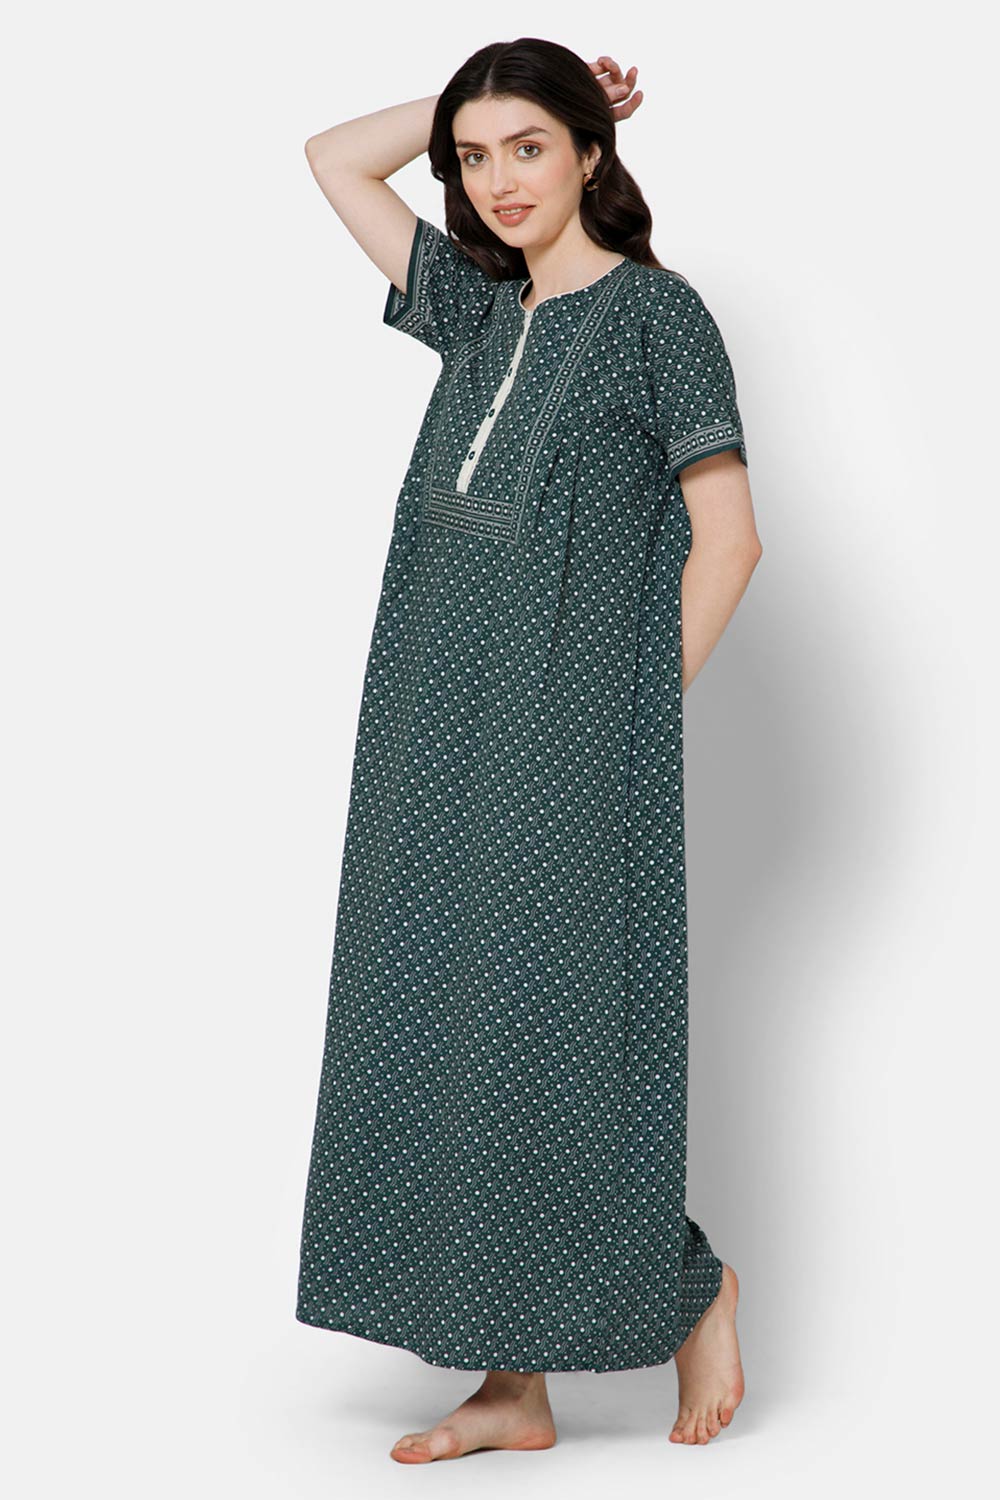 Naidu Hall A-line Front Open Women's Nighty Full Length Half Sleeve  - Teal Green - R127